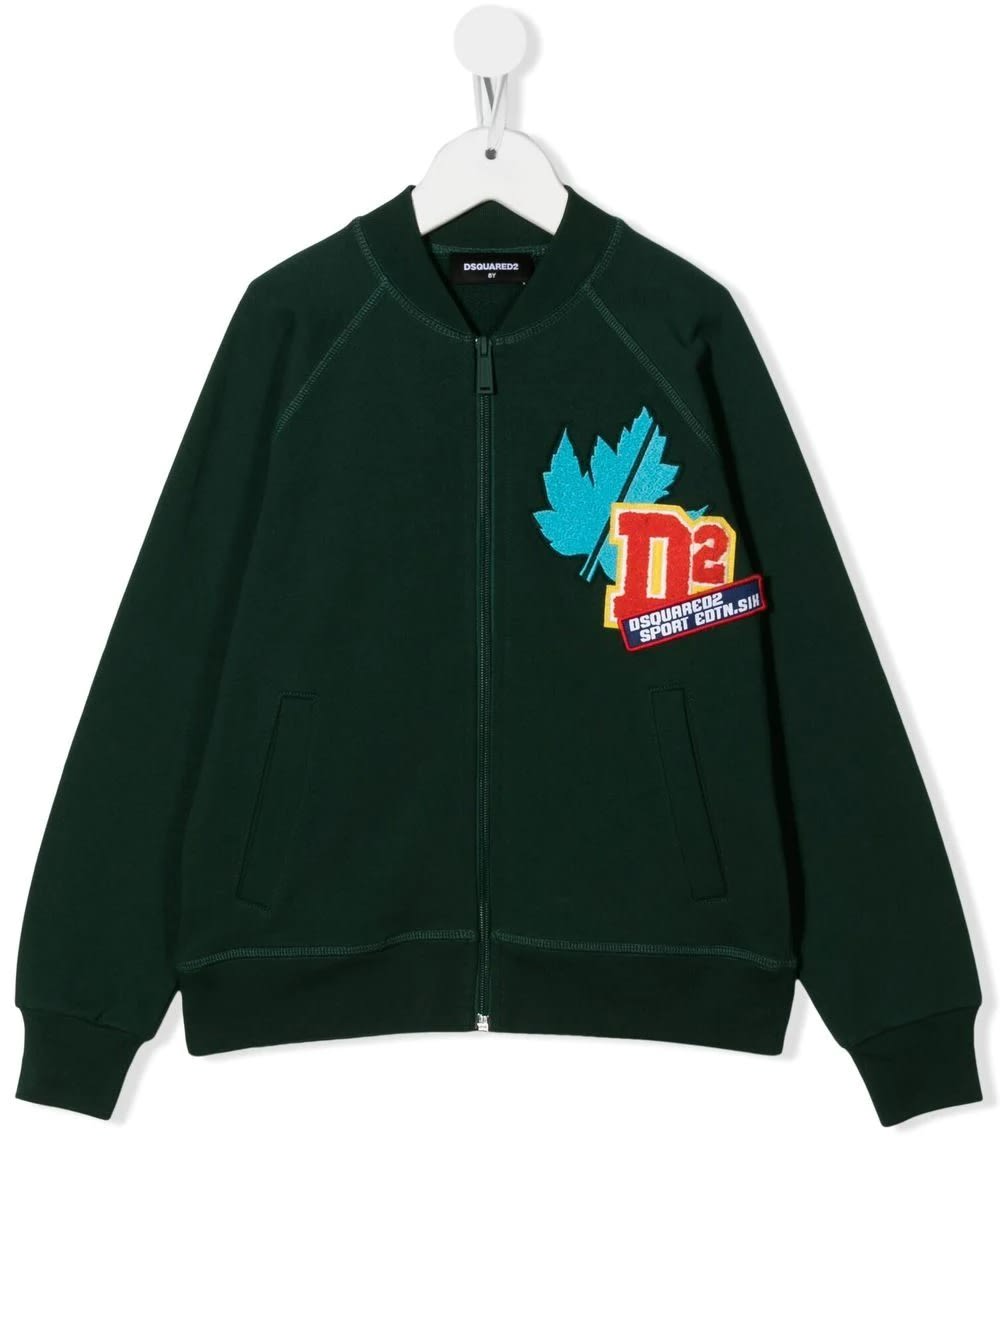 Dsquared2 Kids Green Sweatshirt With Zip And Patch D2kids Sport Edtn.06